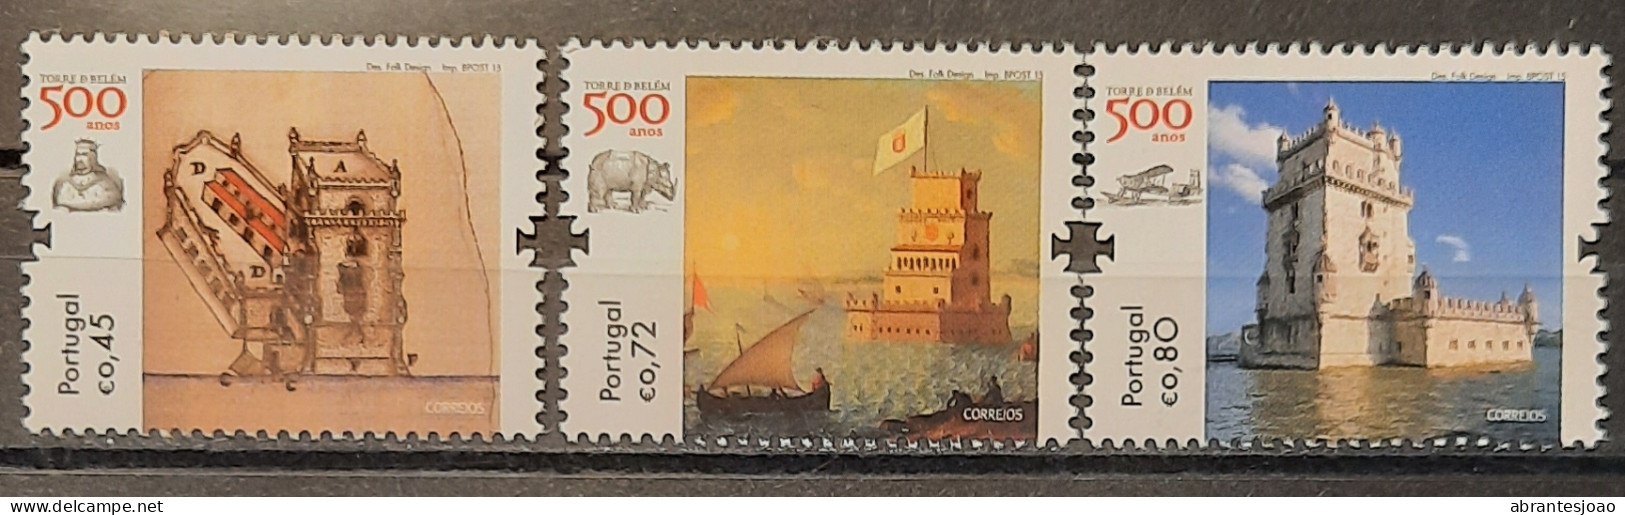 2015 - Portugal - MNH - Tower Of Belem - 500 Years - 3 Stamps - Nuovi